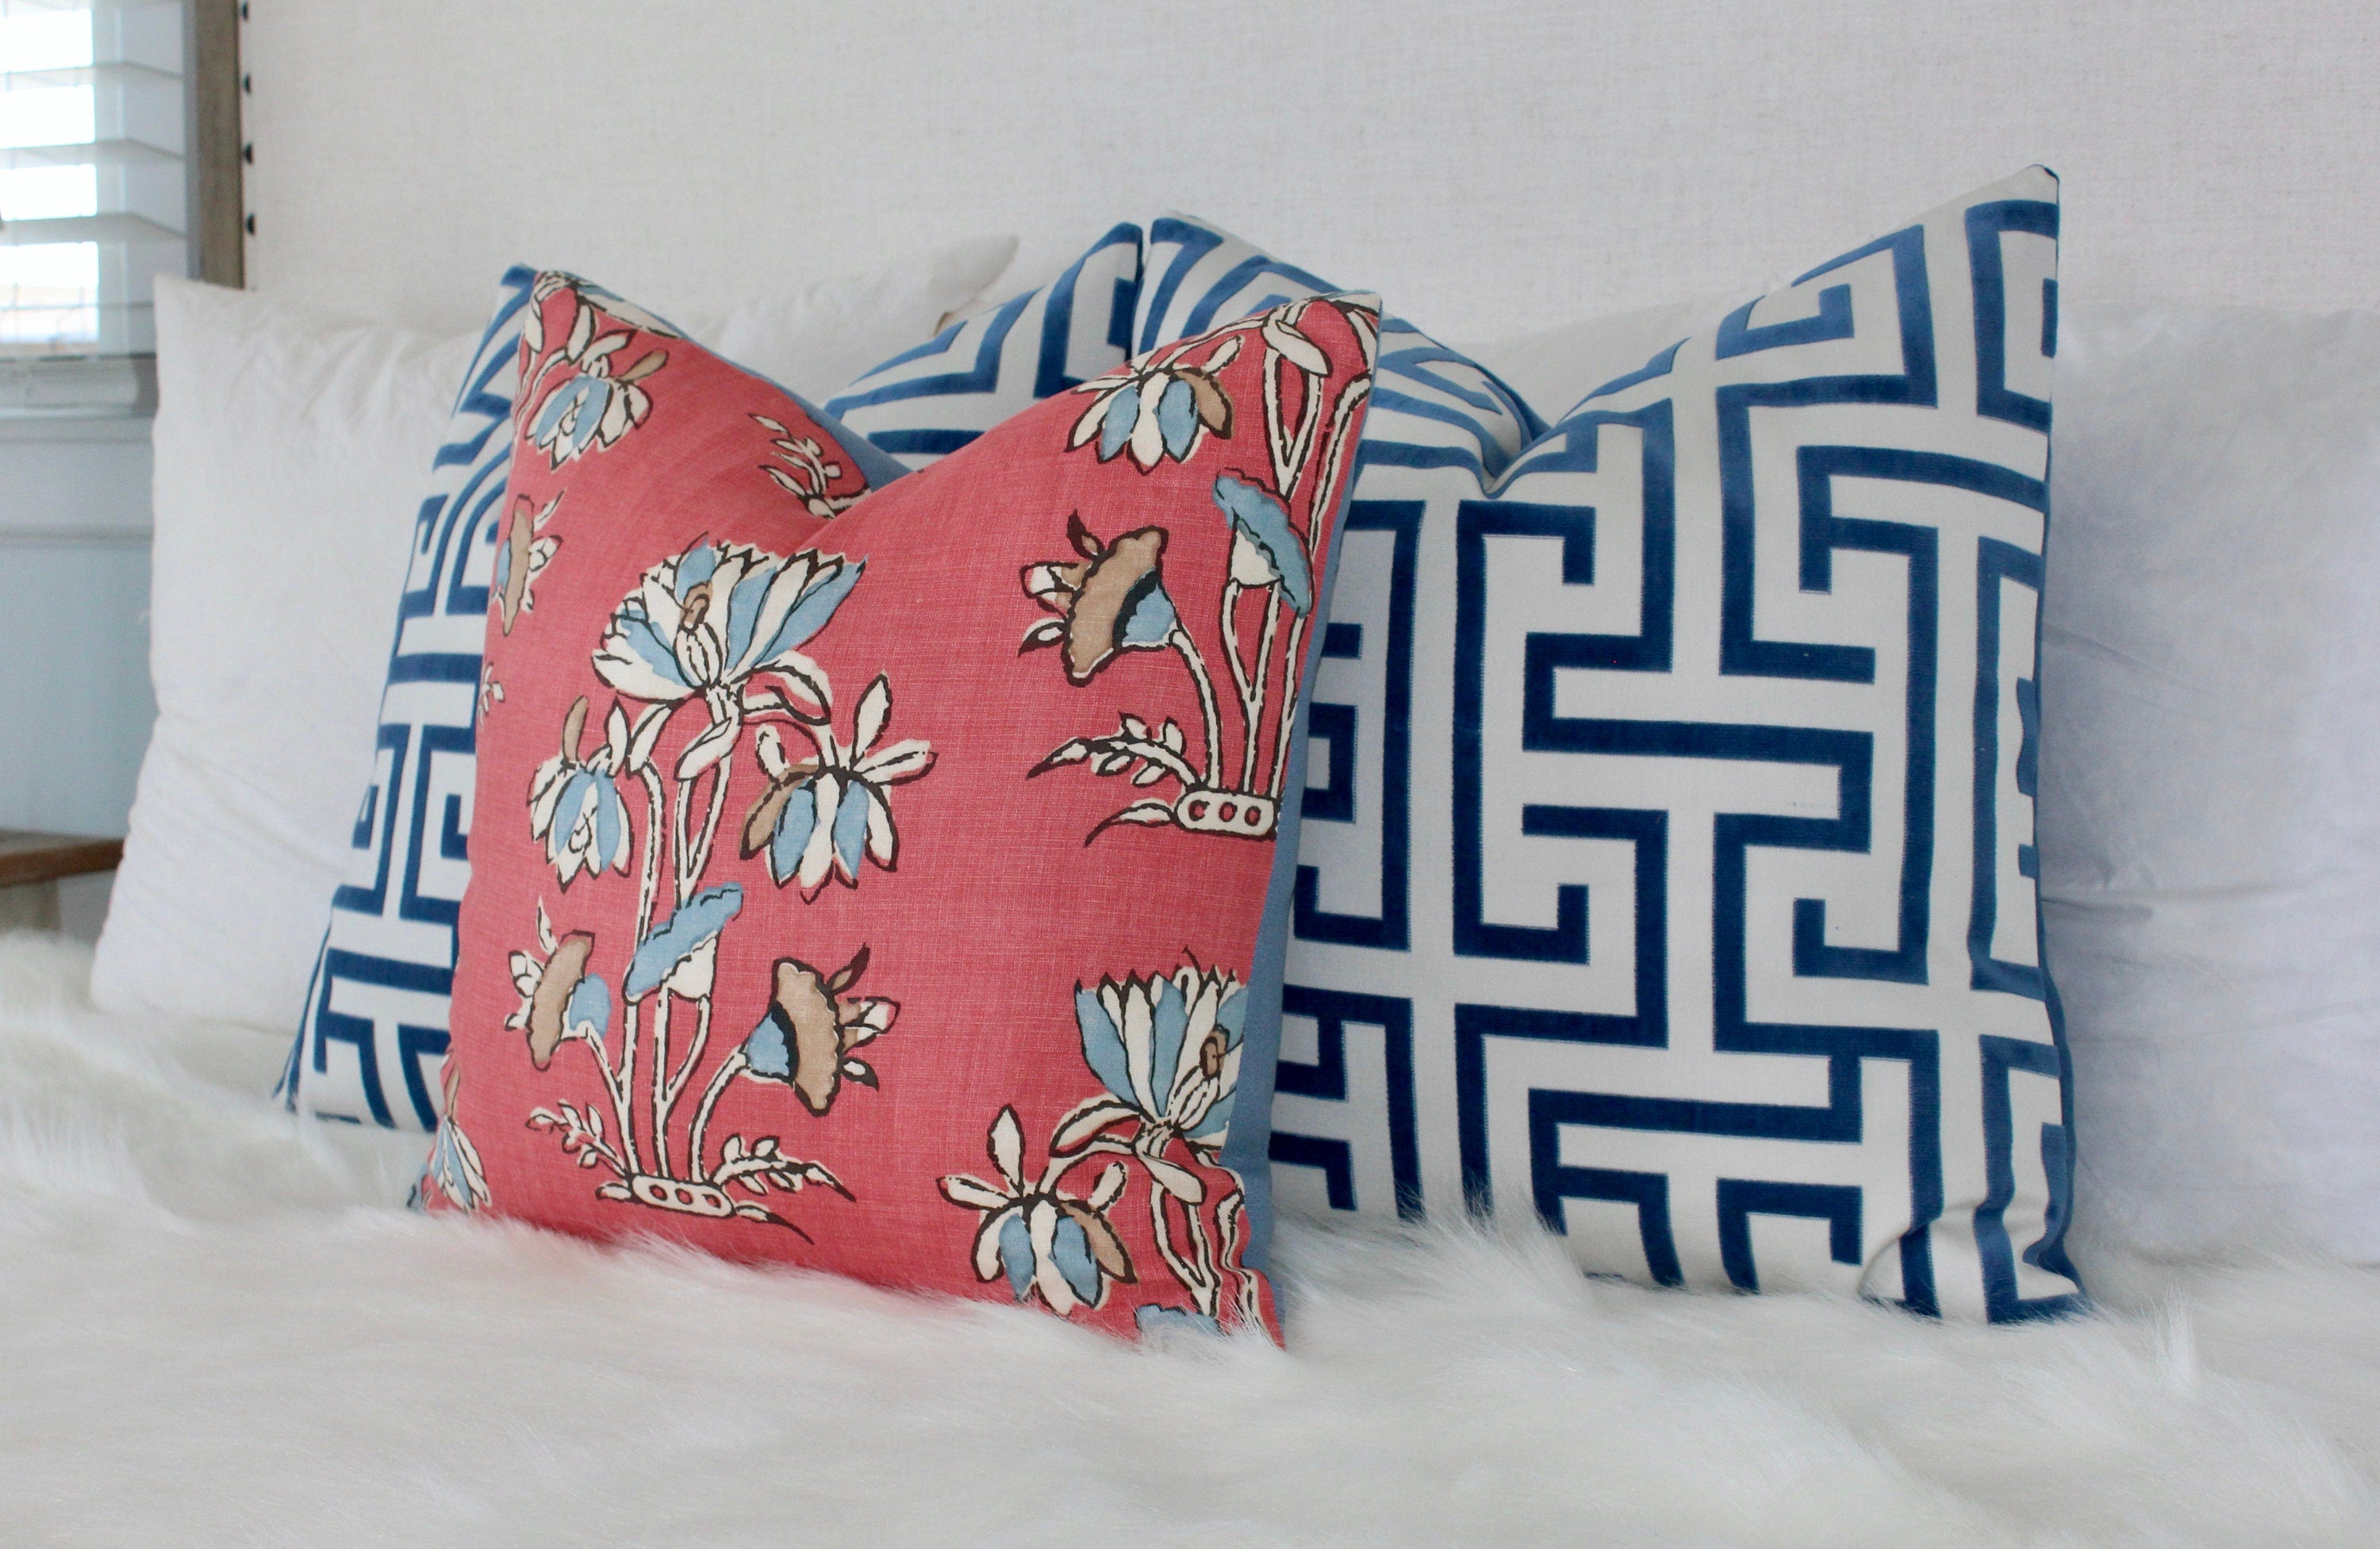 Lily Flower Pillow in Coral. Lumbar Floral Pillow Cover, Designer Coral Throw Pillow, Accent Pillow in Red Blue,  Euro Sham Cushion Cover